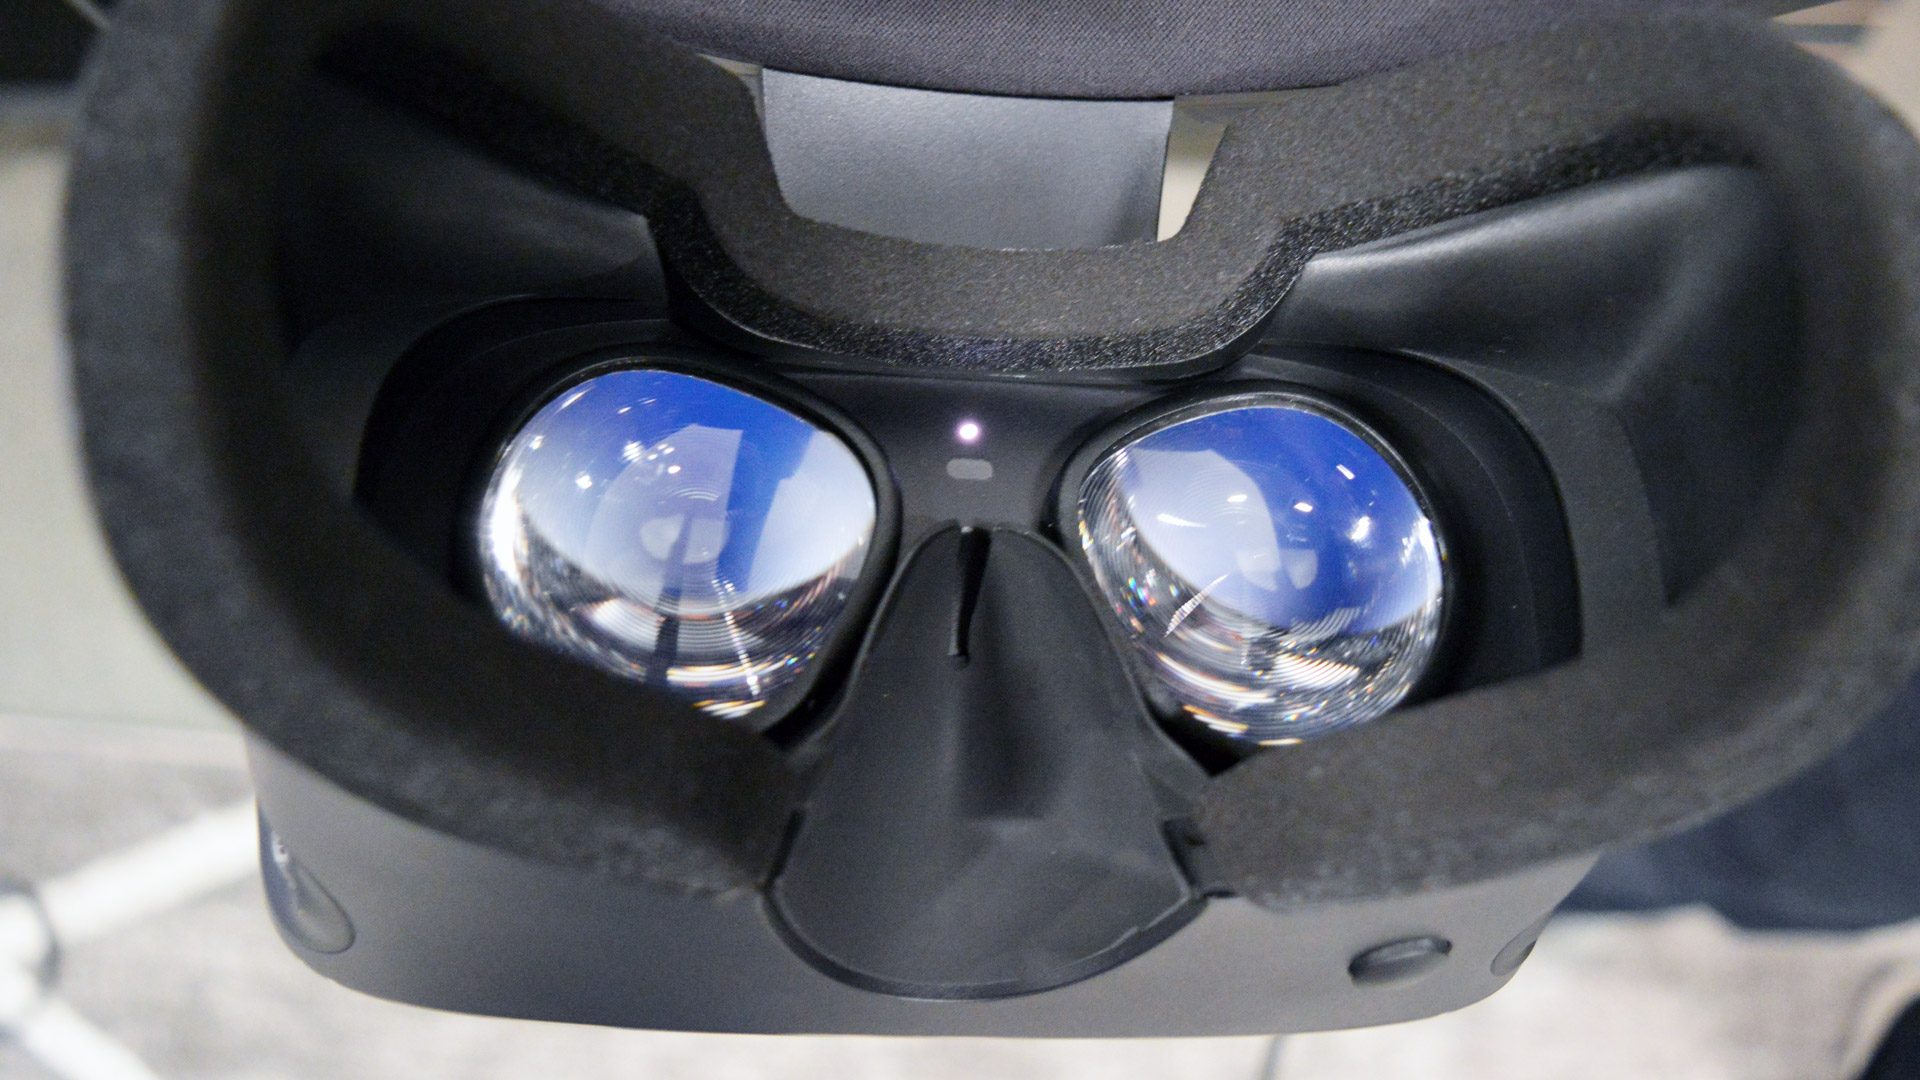 Hands-on: Oculus Rift S is a Better, Easier to Use Rift (with a Few